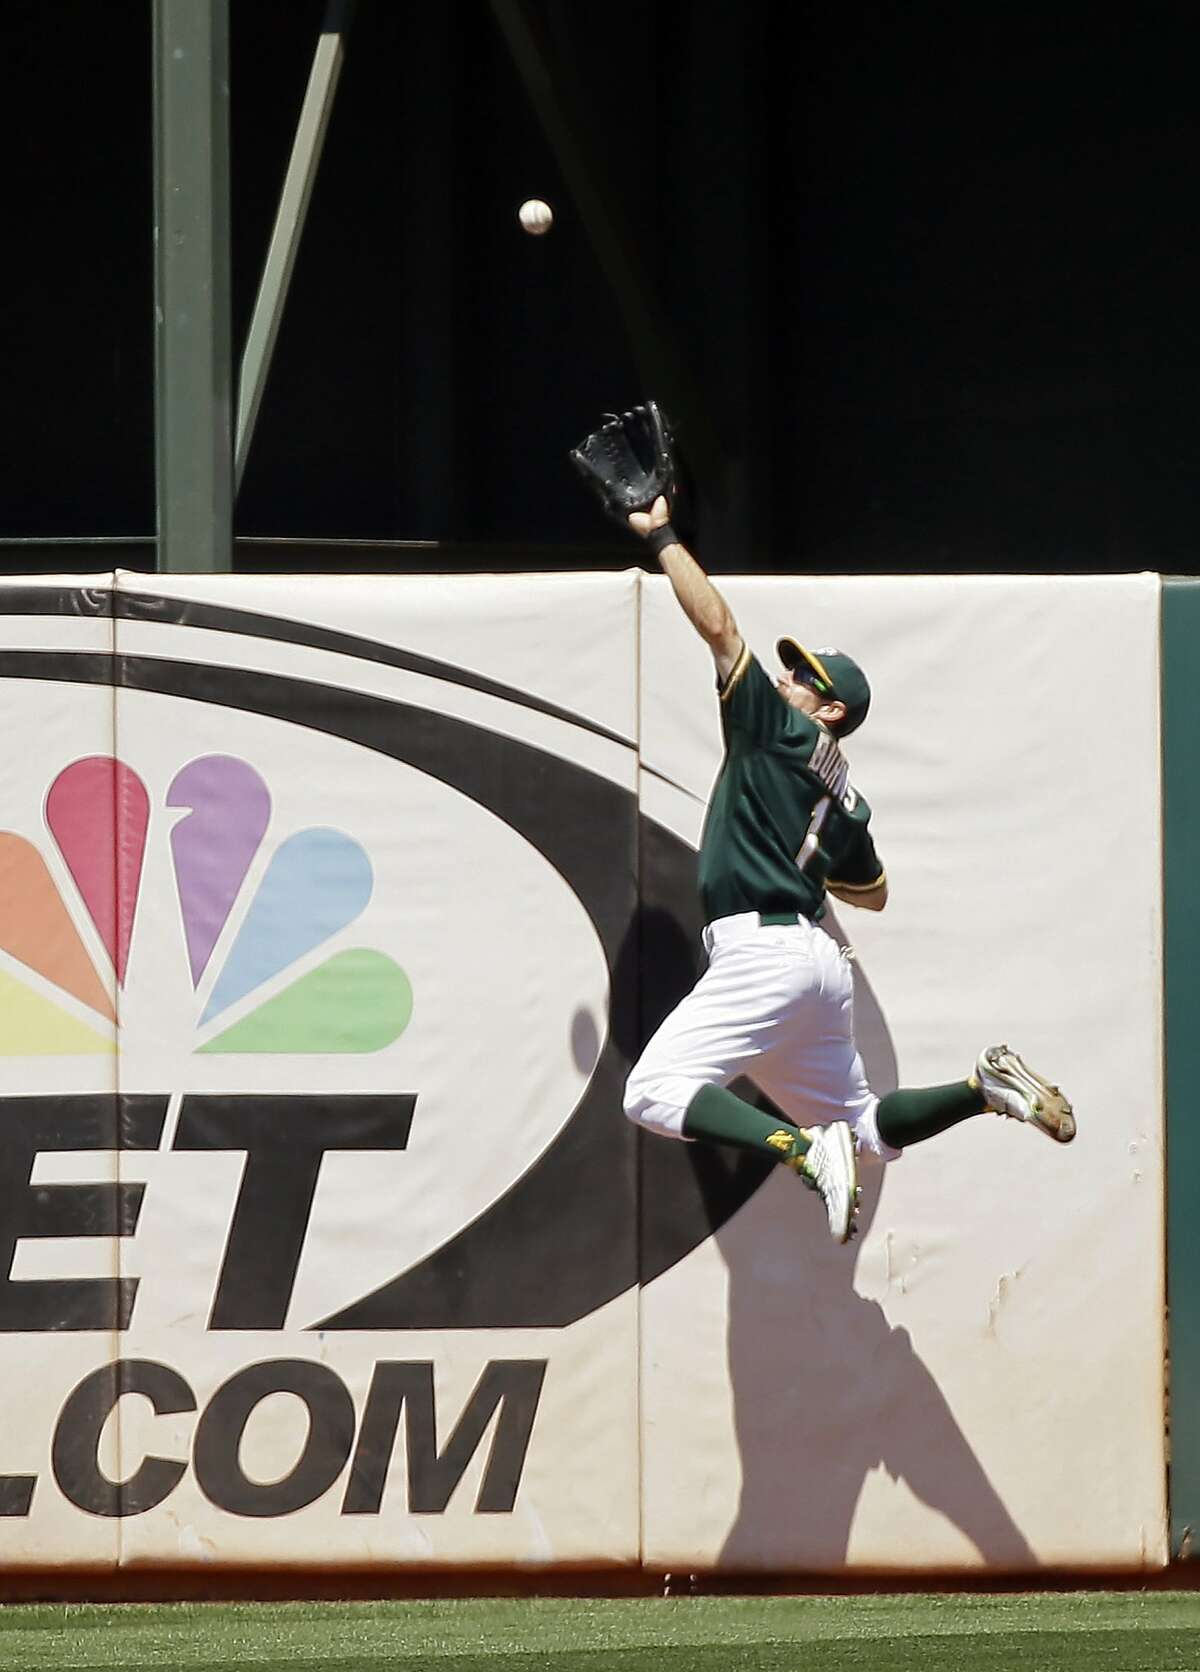 Oakland Athletics center fielder Billy Burns makes a leaping catch at the wall on a fly ball hit by the Baltimore Orioles' Adam Jones during the sixth inning of a baseball game, Wednesday, Aug. 5, 2015, in Oakland, Calif. (AP Photo/Eric Risberg)